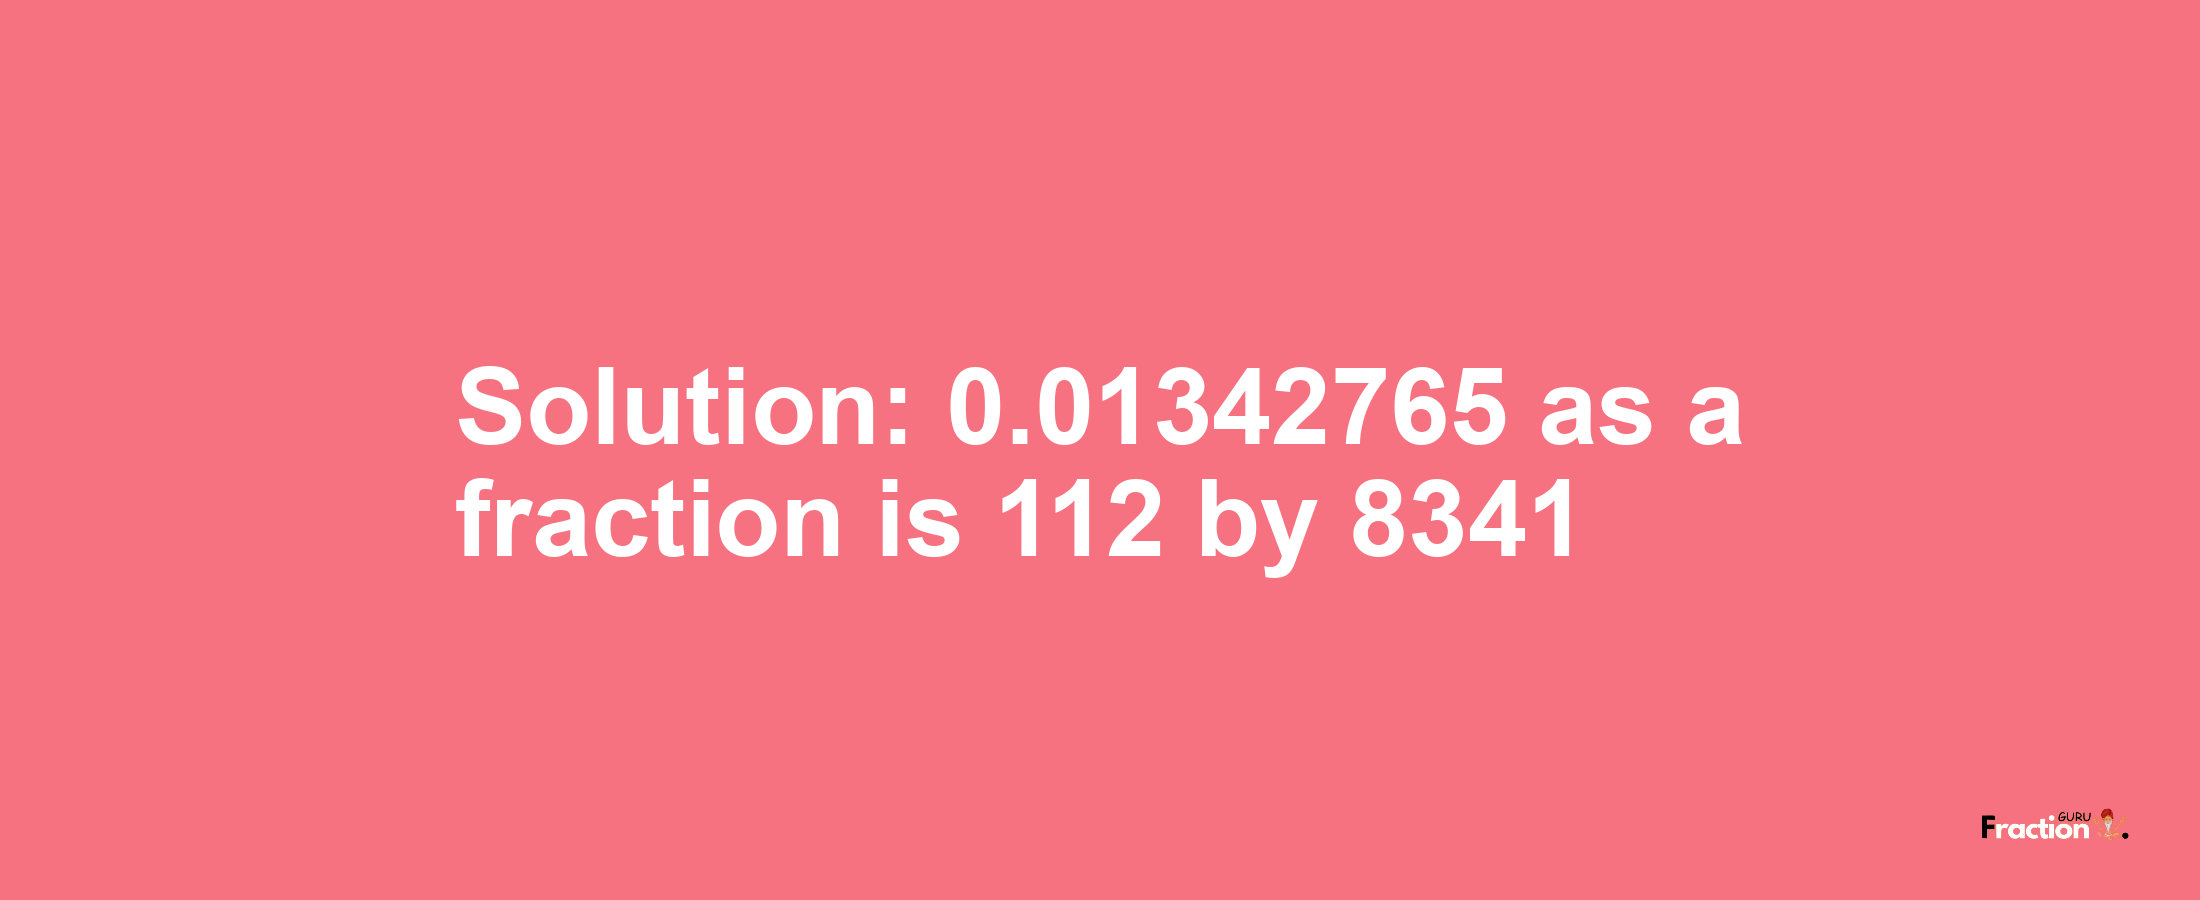 Solution:0.01342765 as a fraction is 112/8341